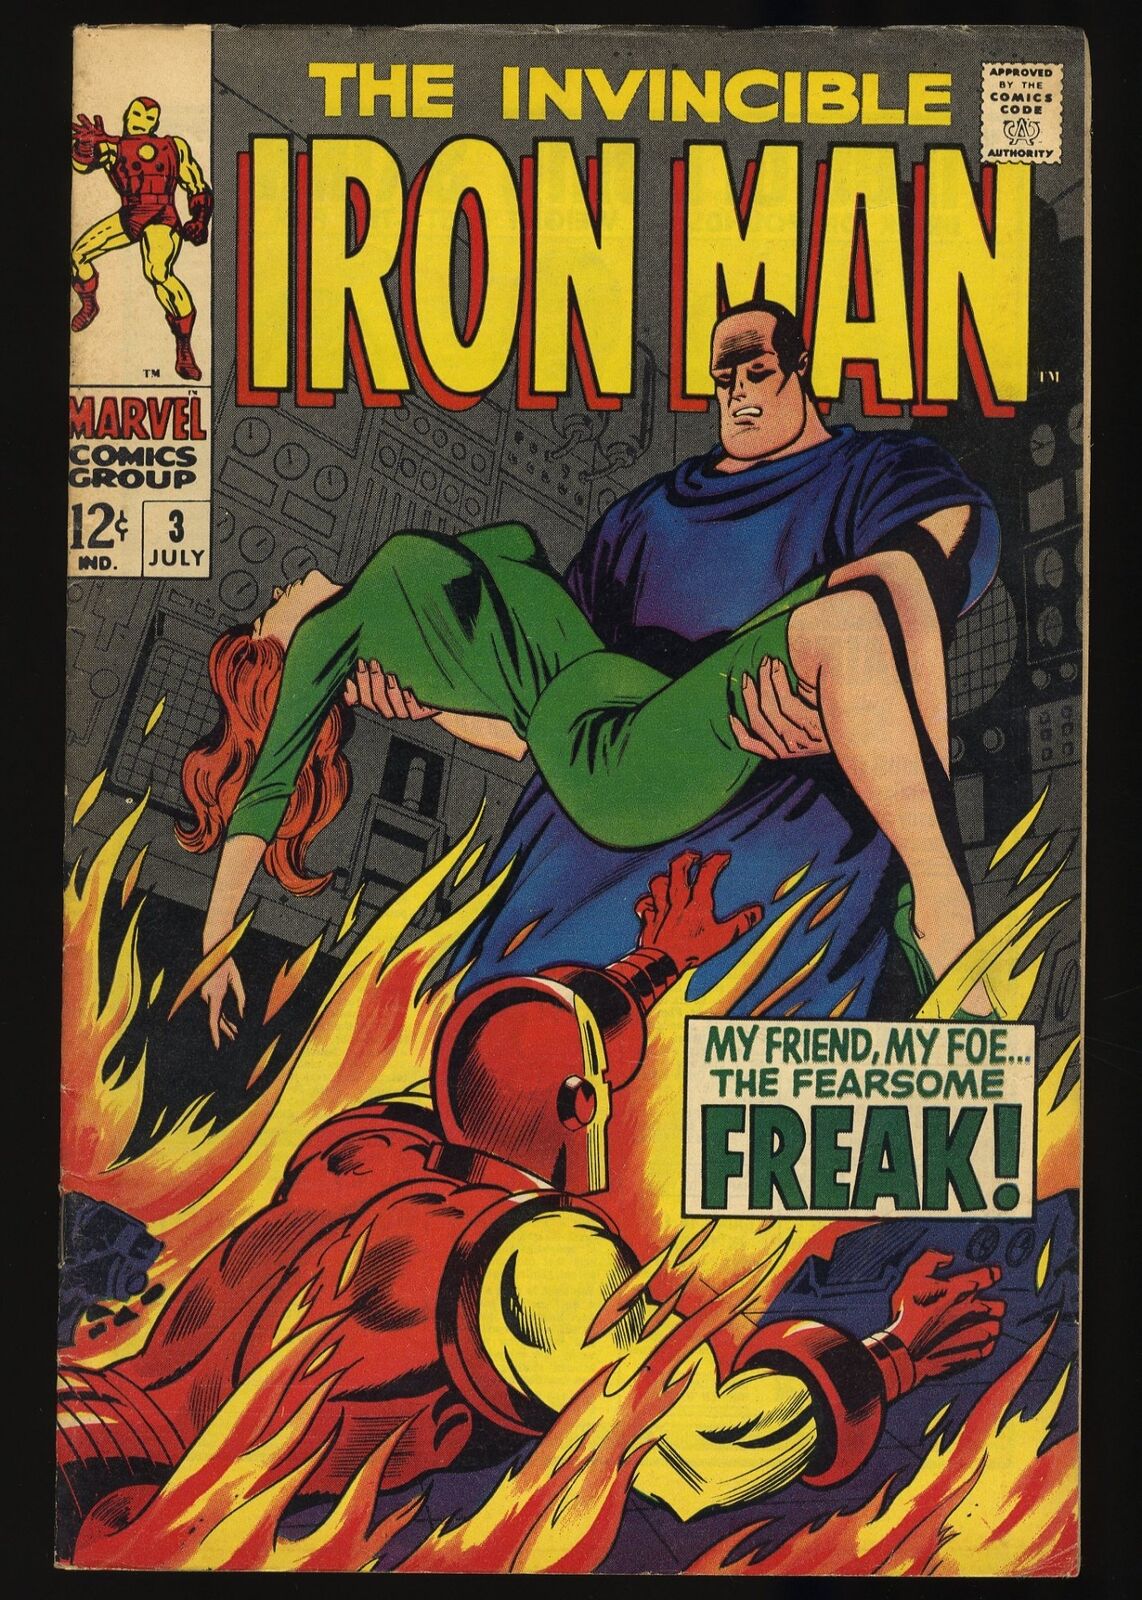 Iron Man #3 FN+ 6.5 Johnny Craig Cover and Art Marvel 1968